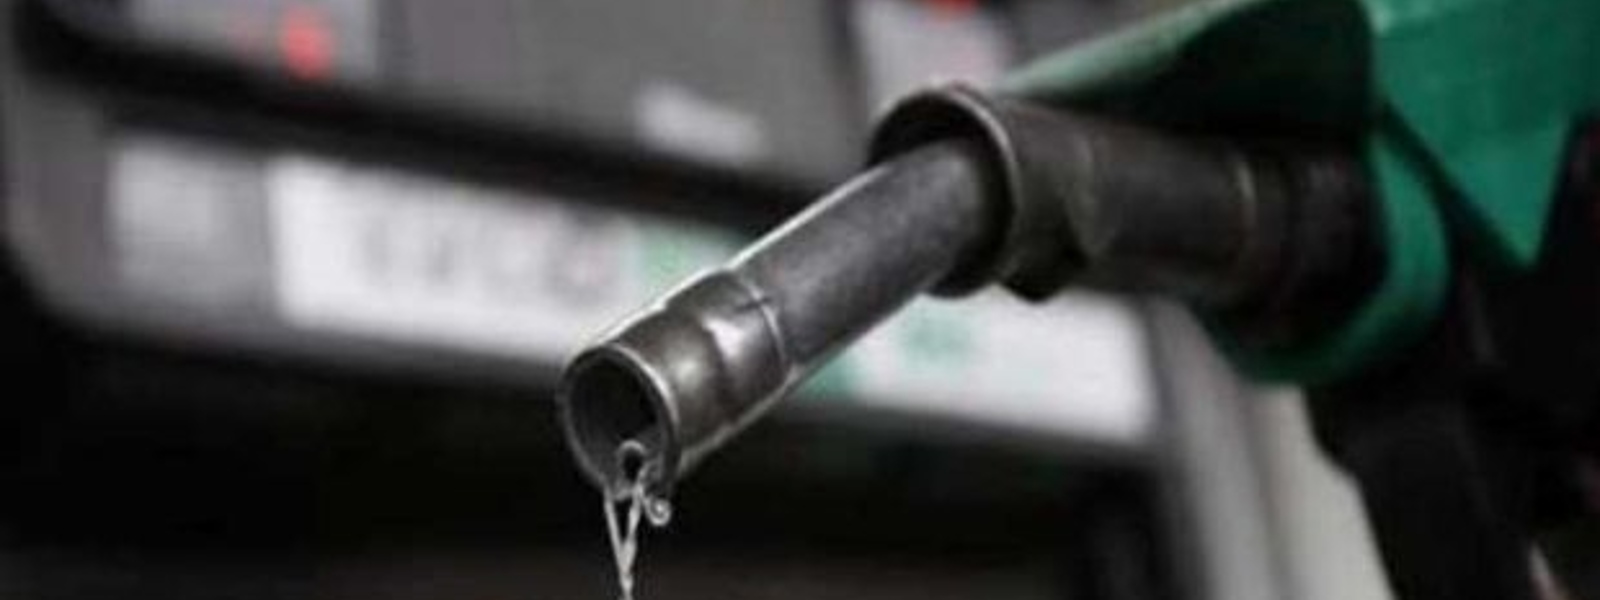 Fuel limit imposed for cars, vans, suv, motorcycles, & three-wheeler